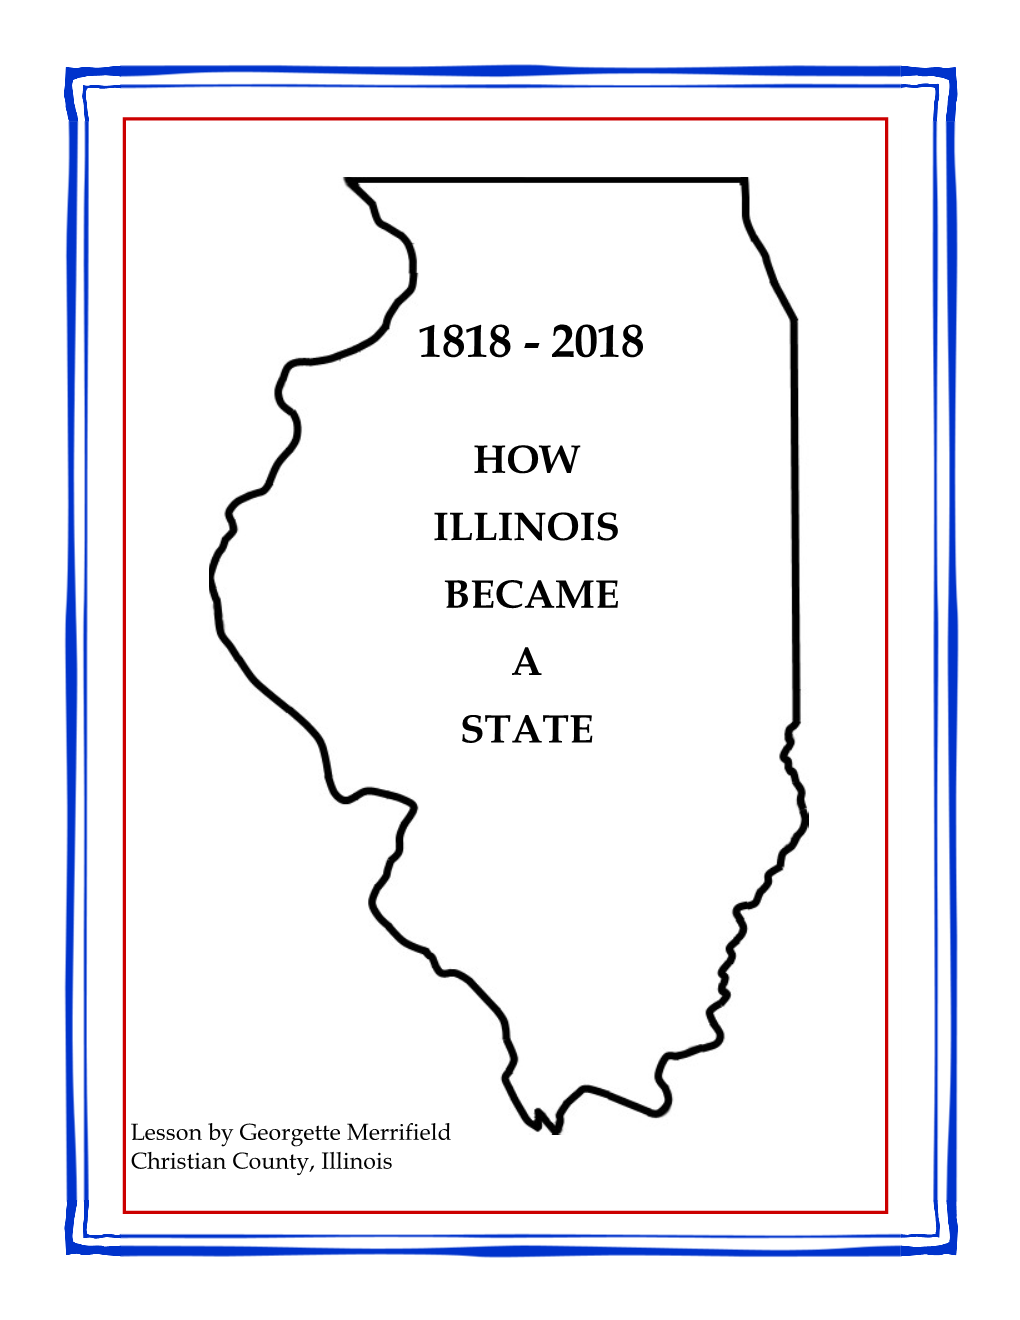 A History of Illinois by Georgette Merrifield